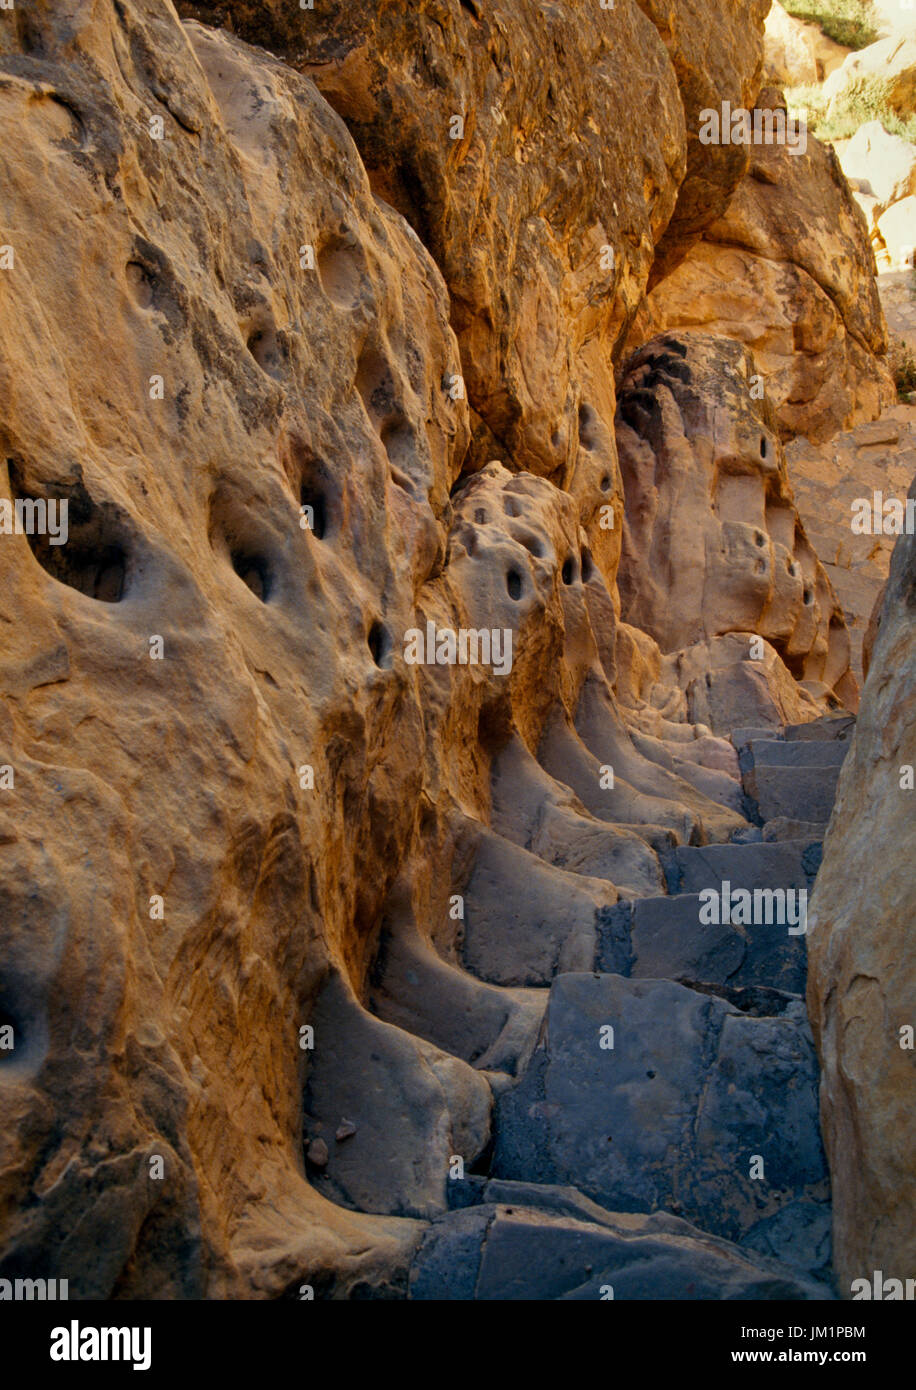 Acoma Pueblo, Grants, New Mexico, USA; Old trail up rocks. Modern steps beside rock-cut hand and toe holds. Stock Photo